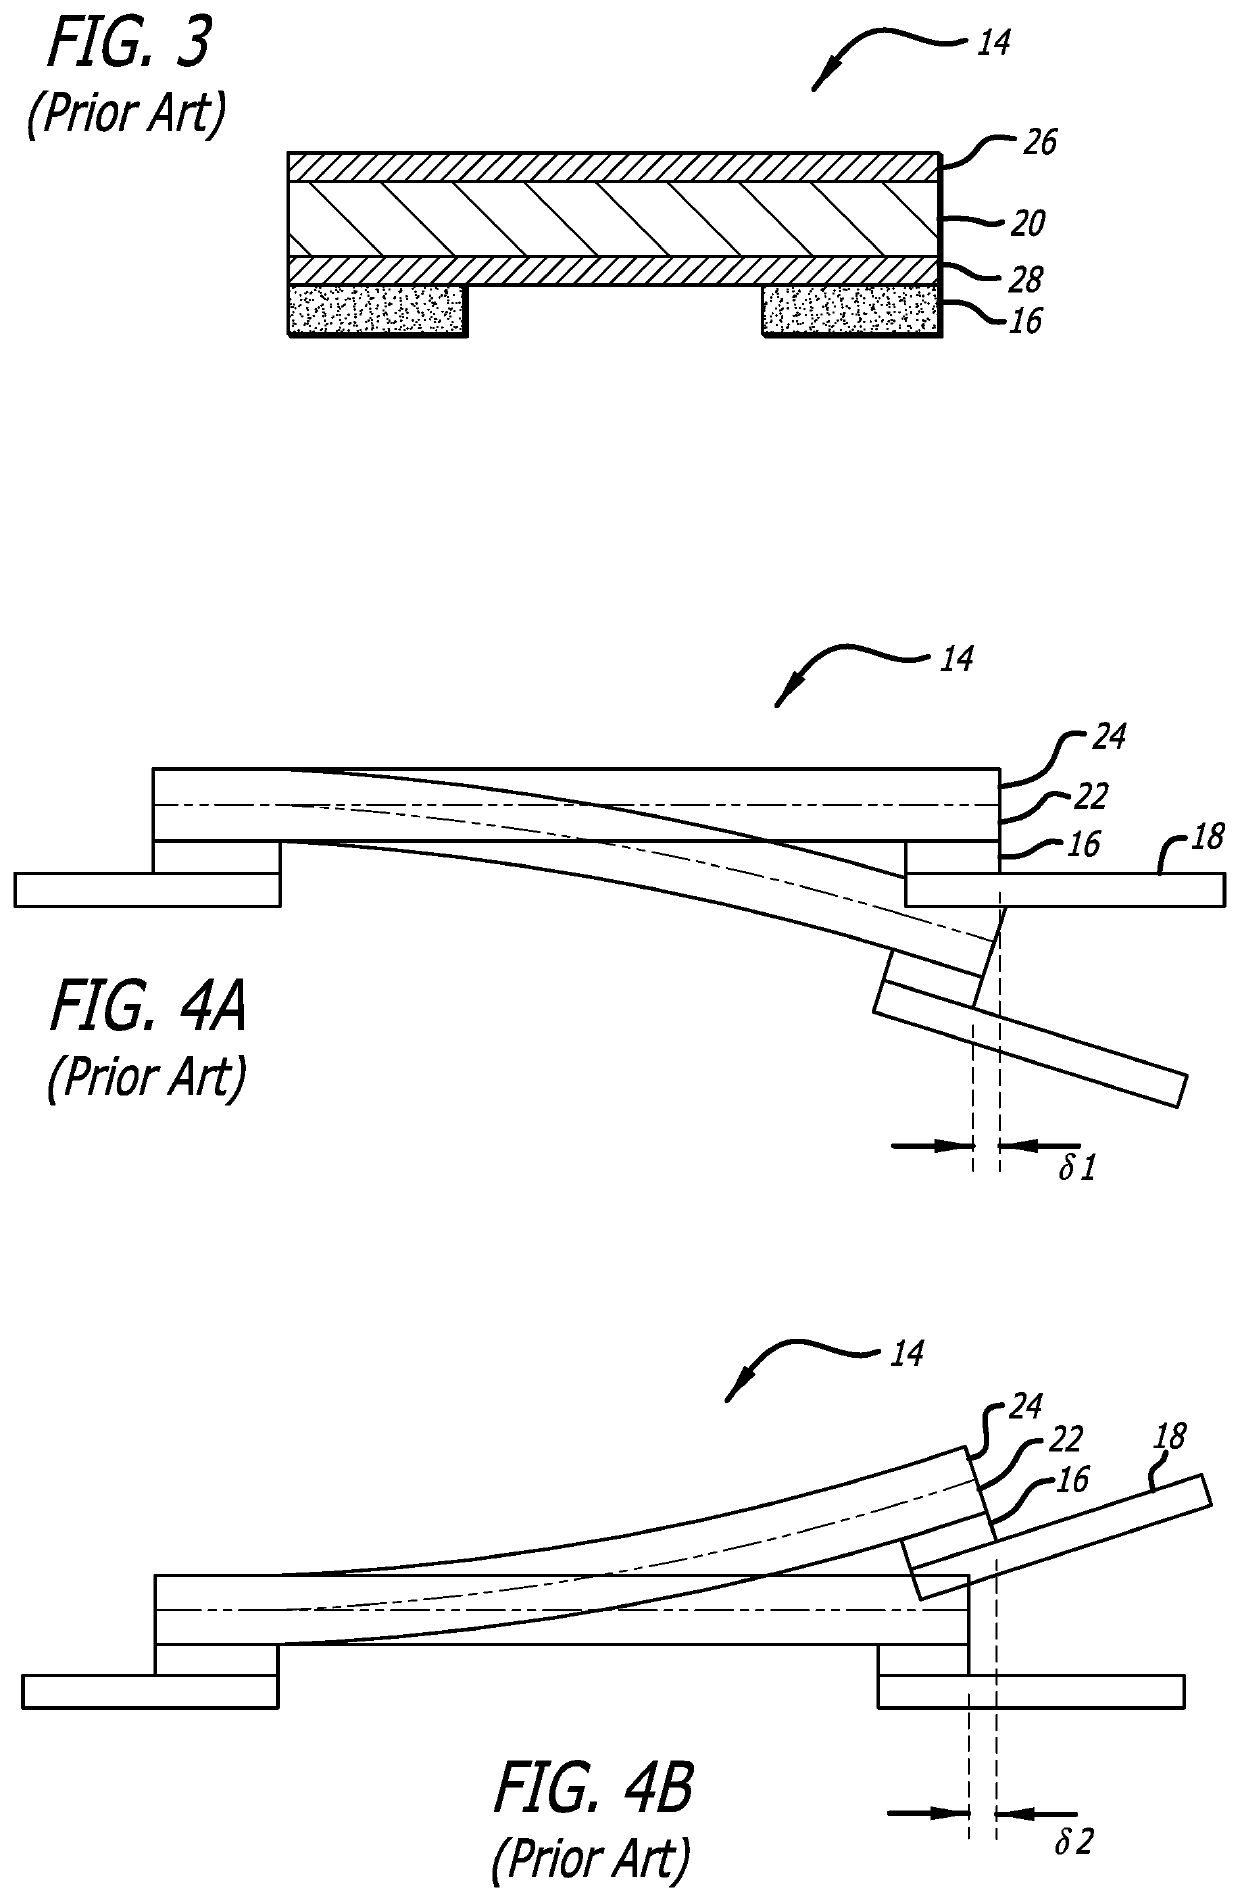 Multi-layer PZT microactuator with active PZT constraining layers for a DSA suspension